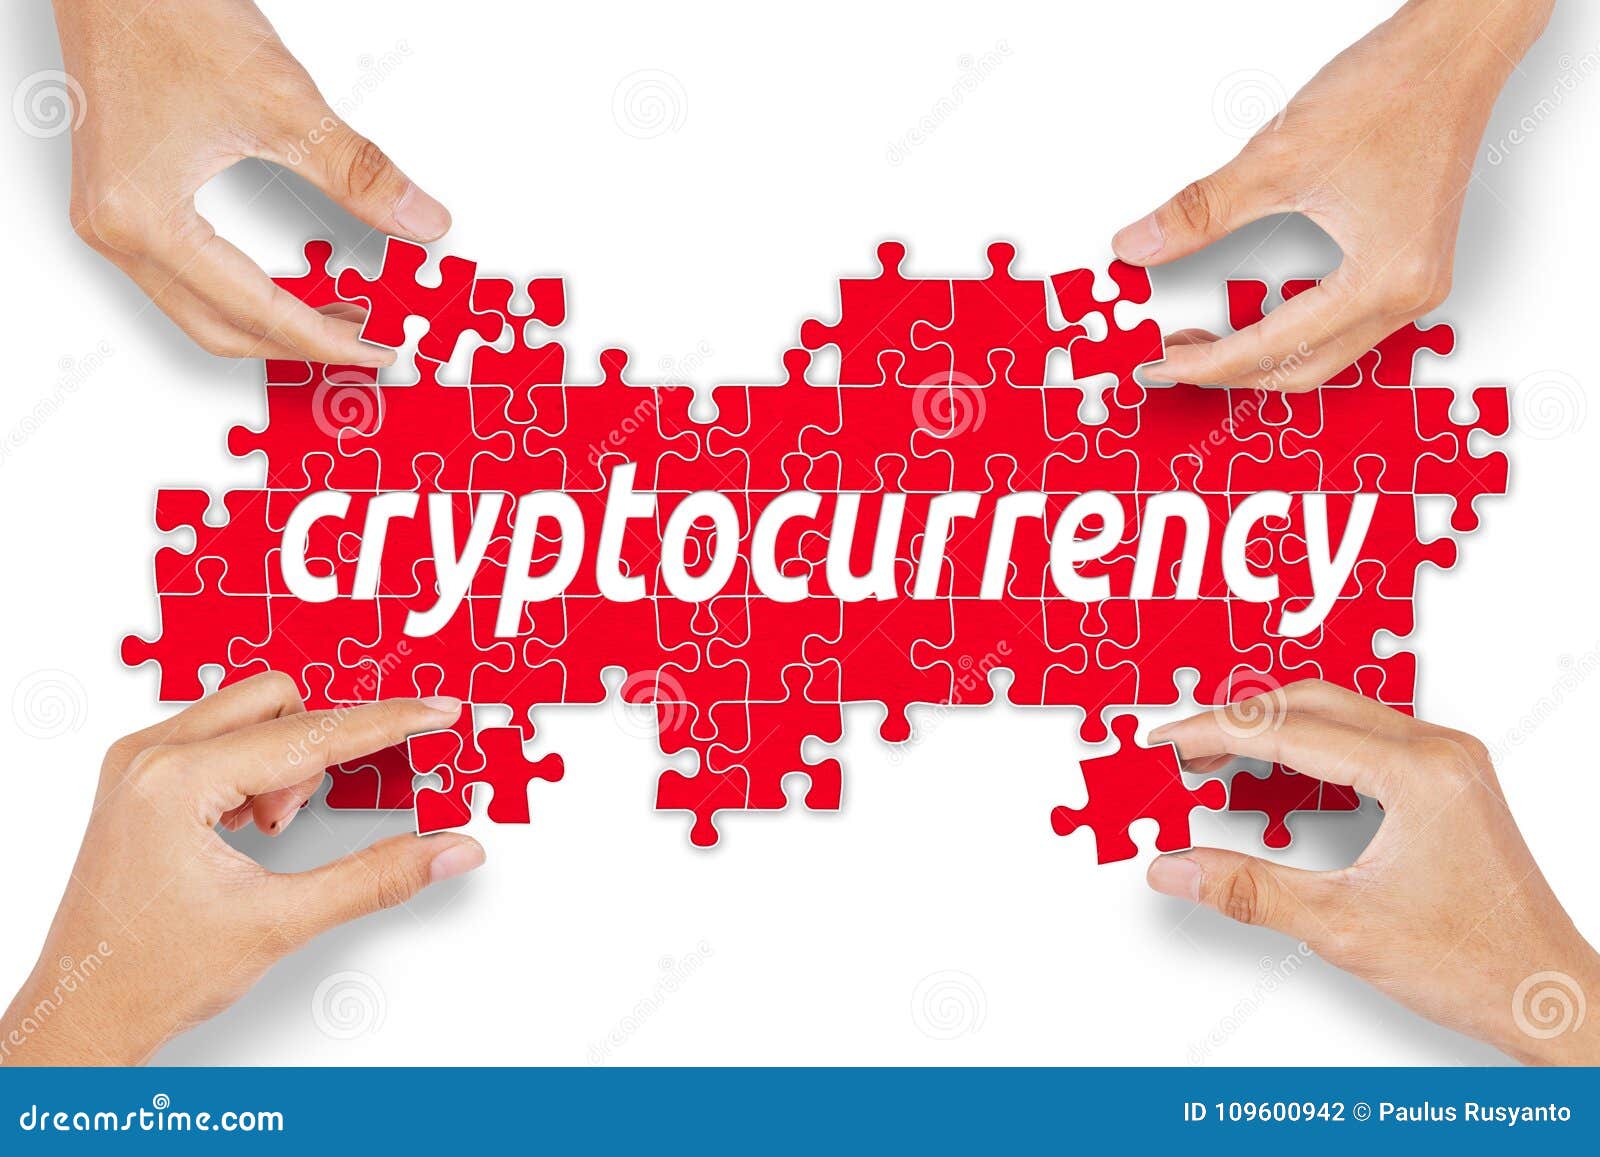 Anonymous People Composing Cryptocurrency Word Stock Photo ...